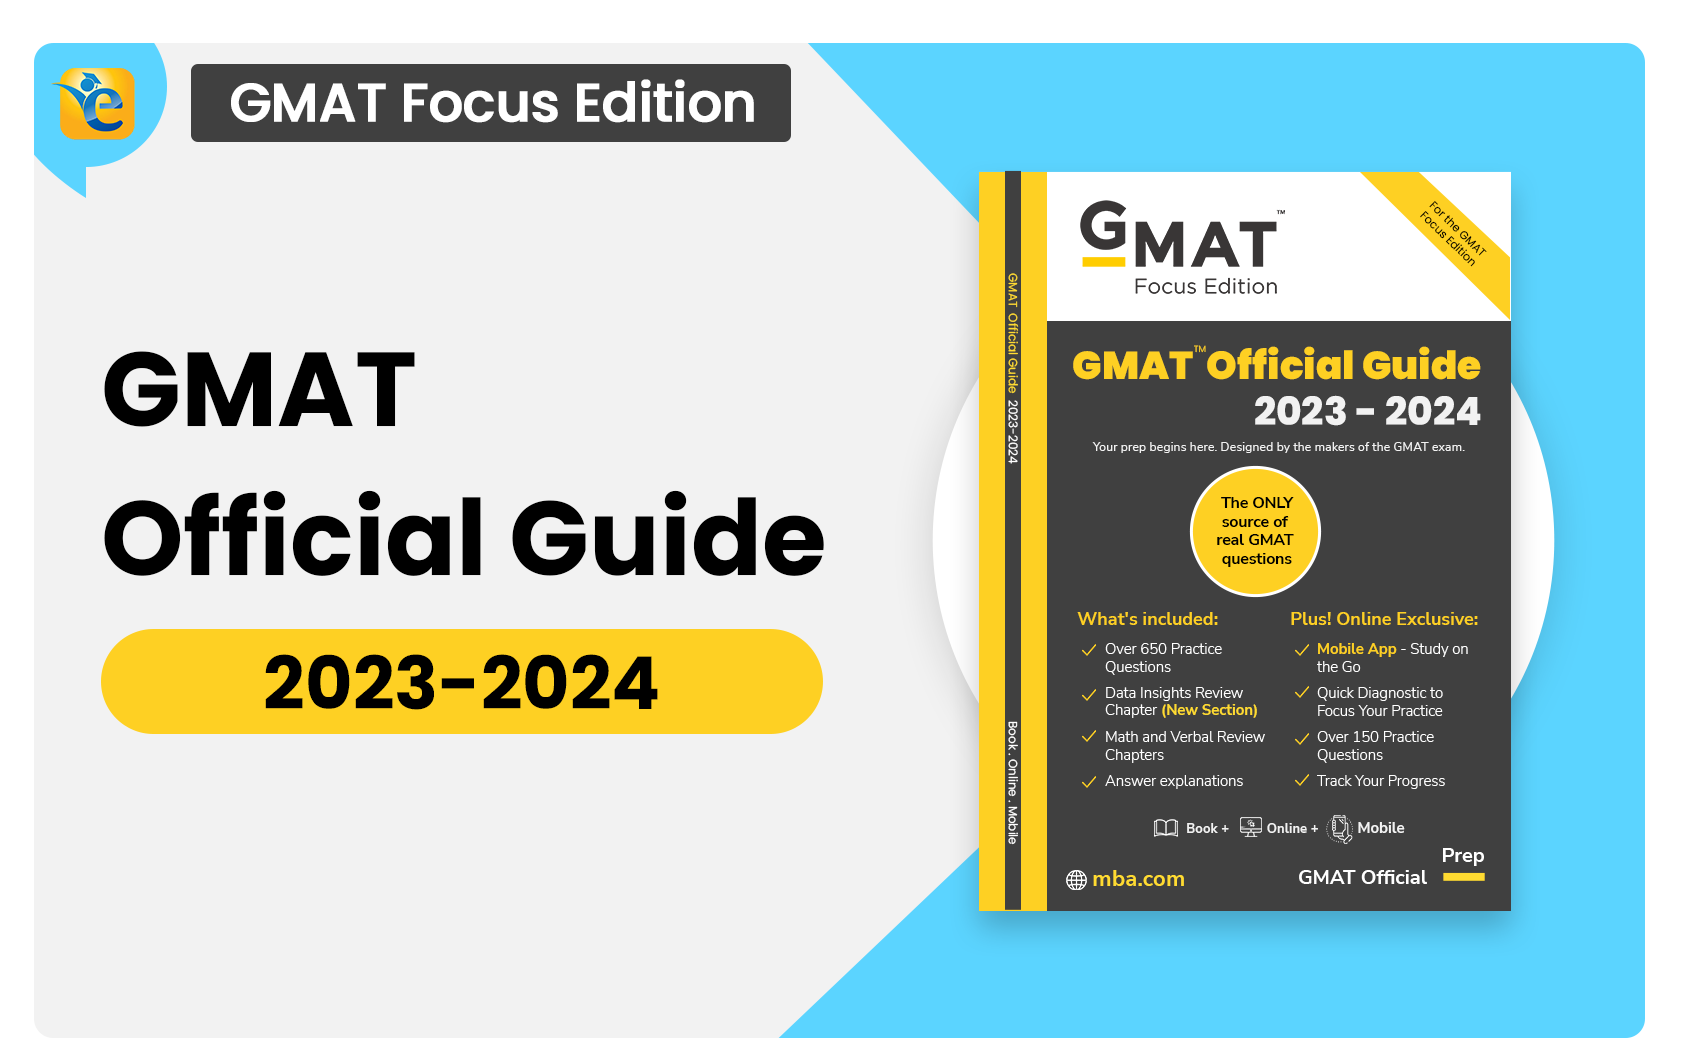 GMAT Official Guide 2023-2024 , Focus Edition - What's New?